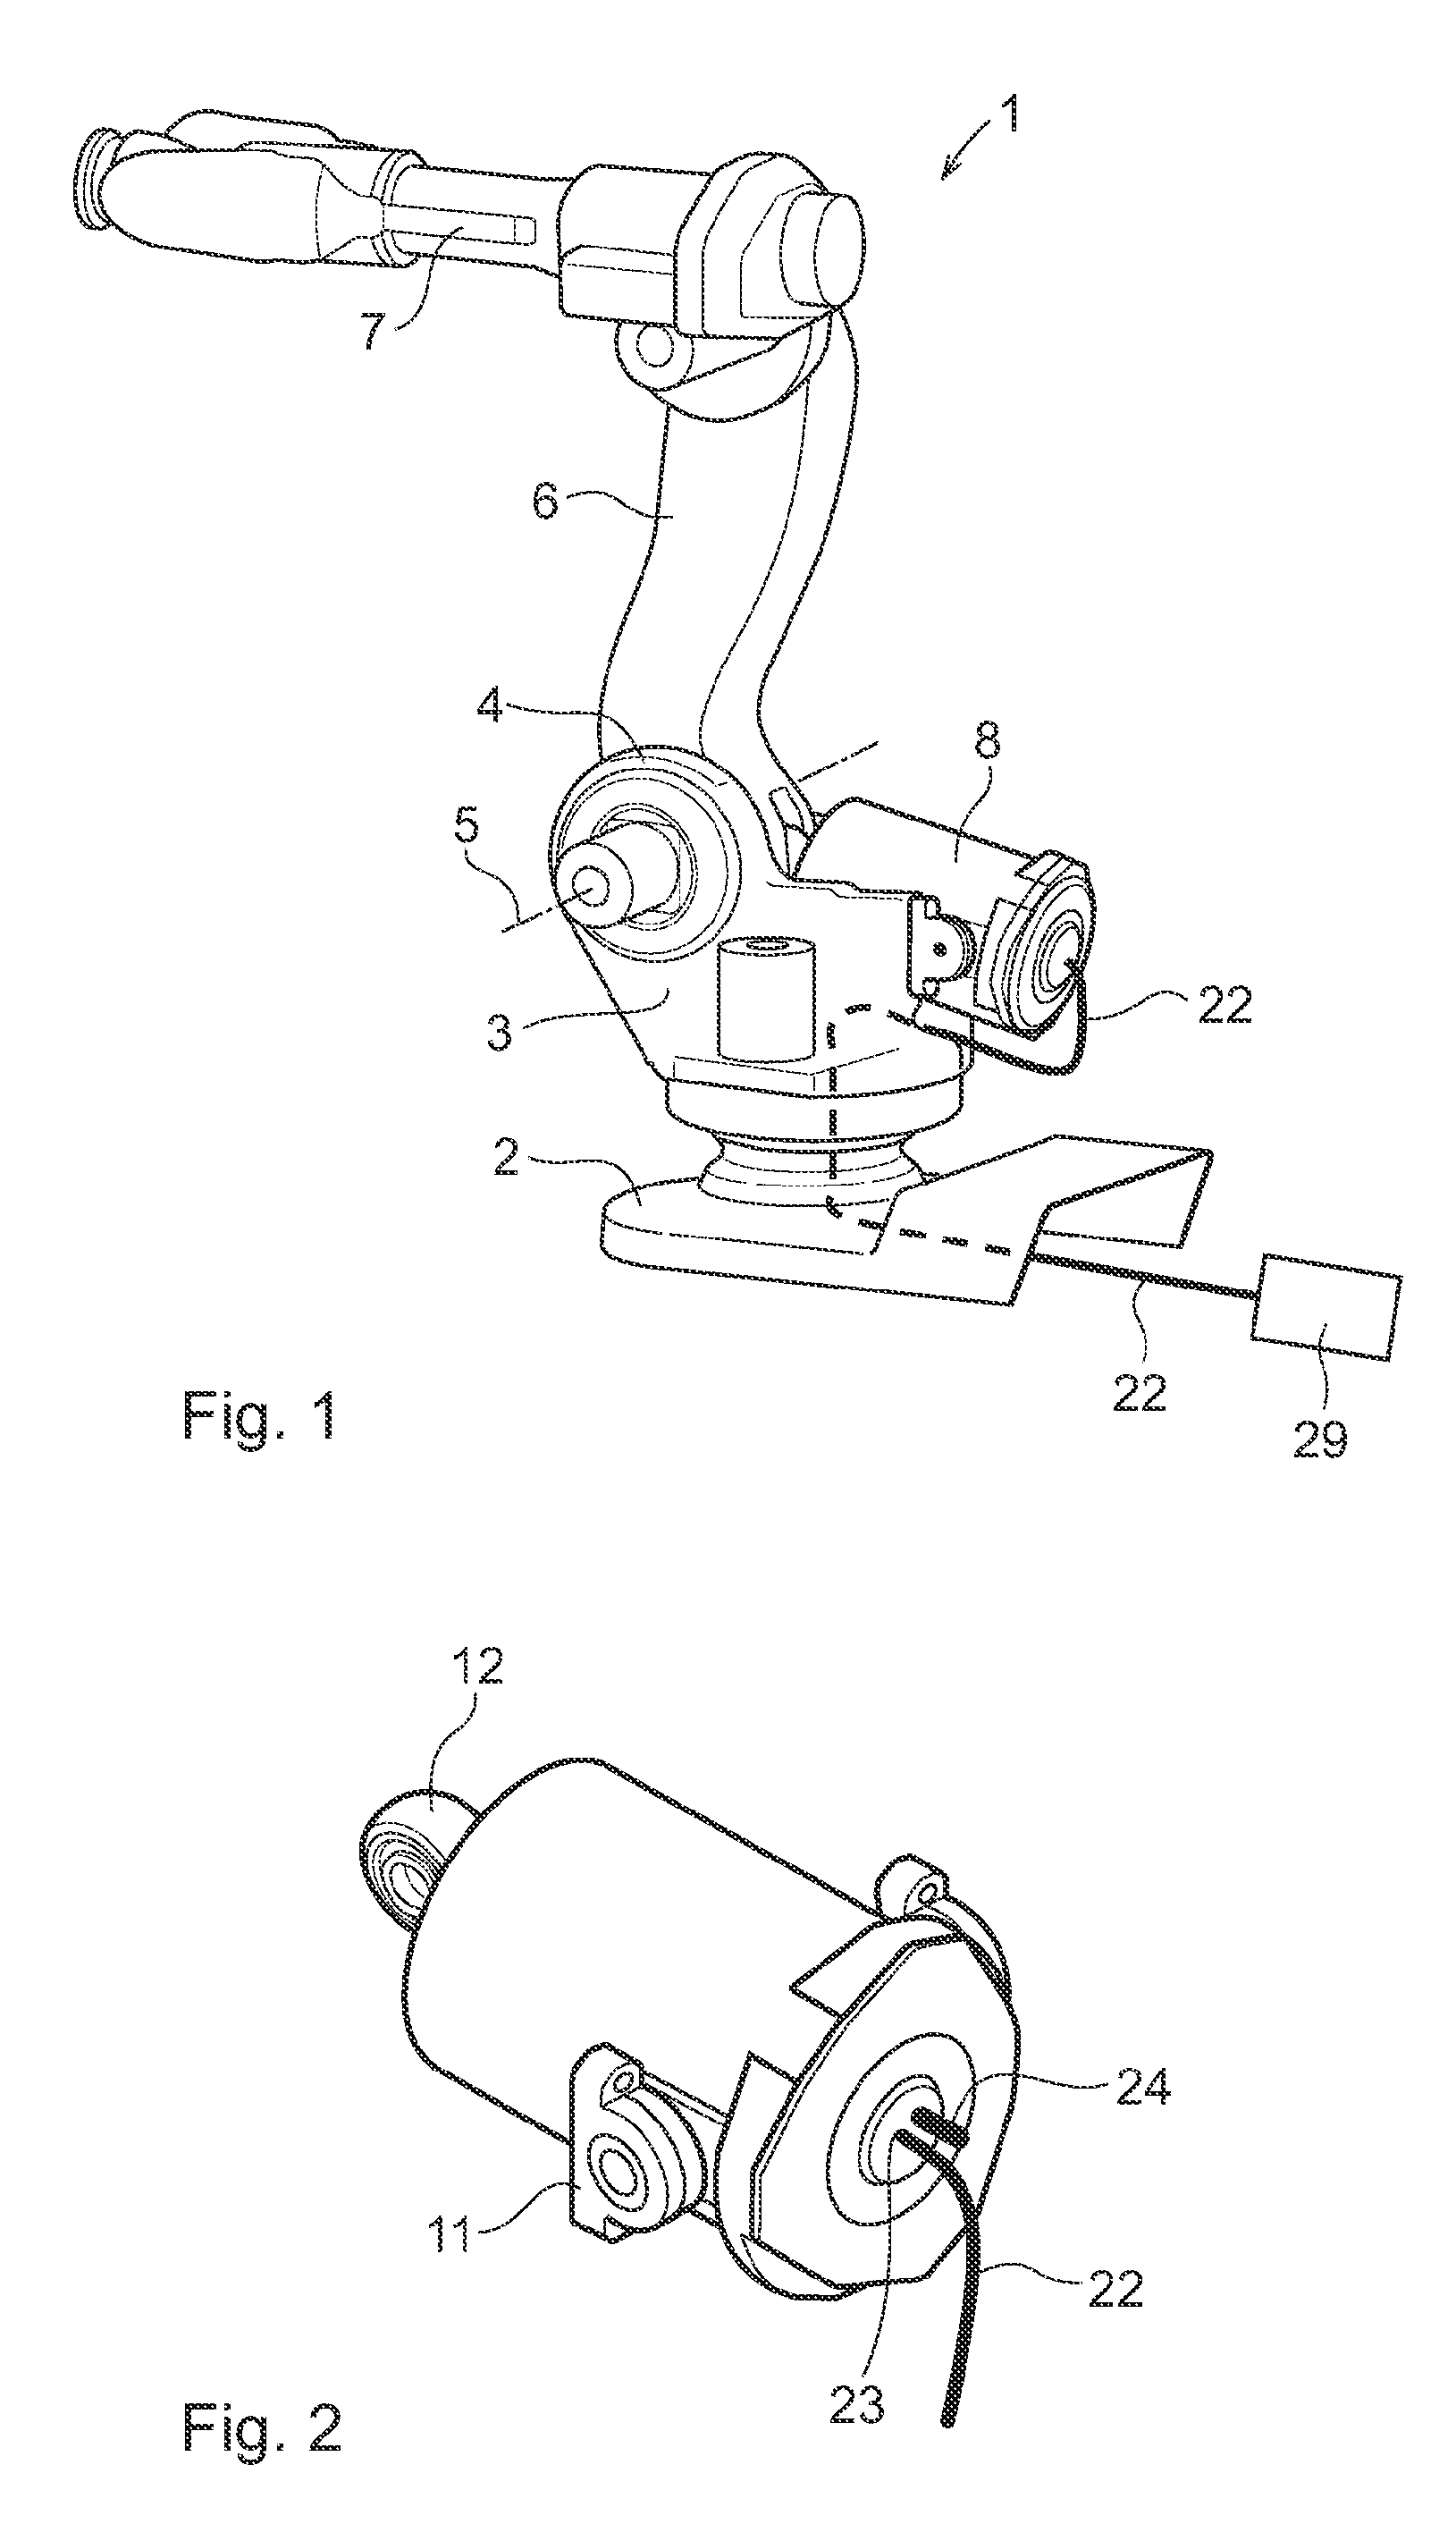 Industrial robot with pressurized air supply in balancing device